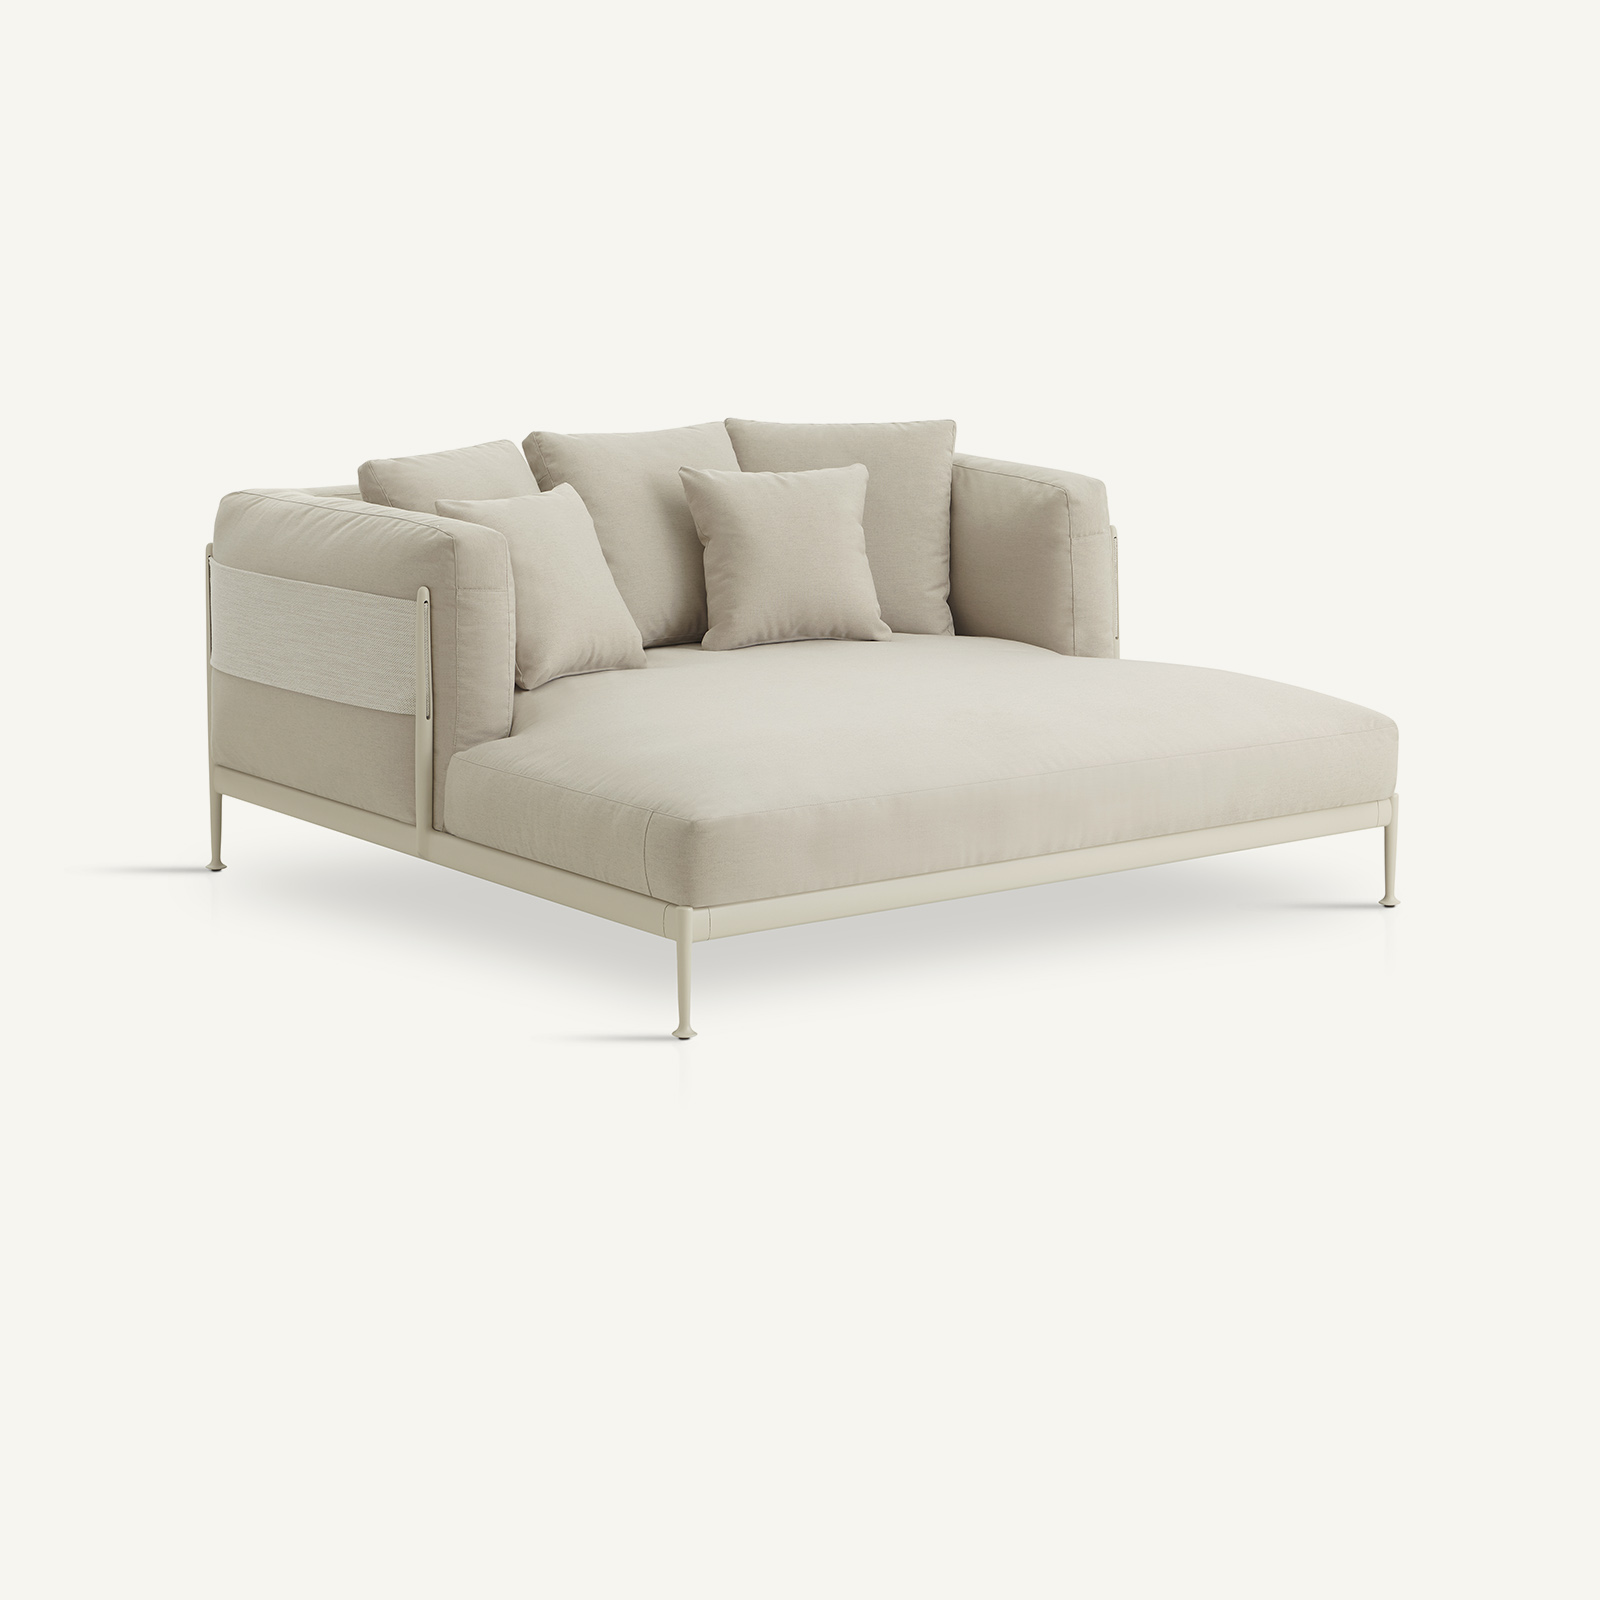 chaise longues - obi daybed